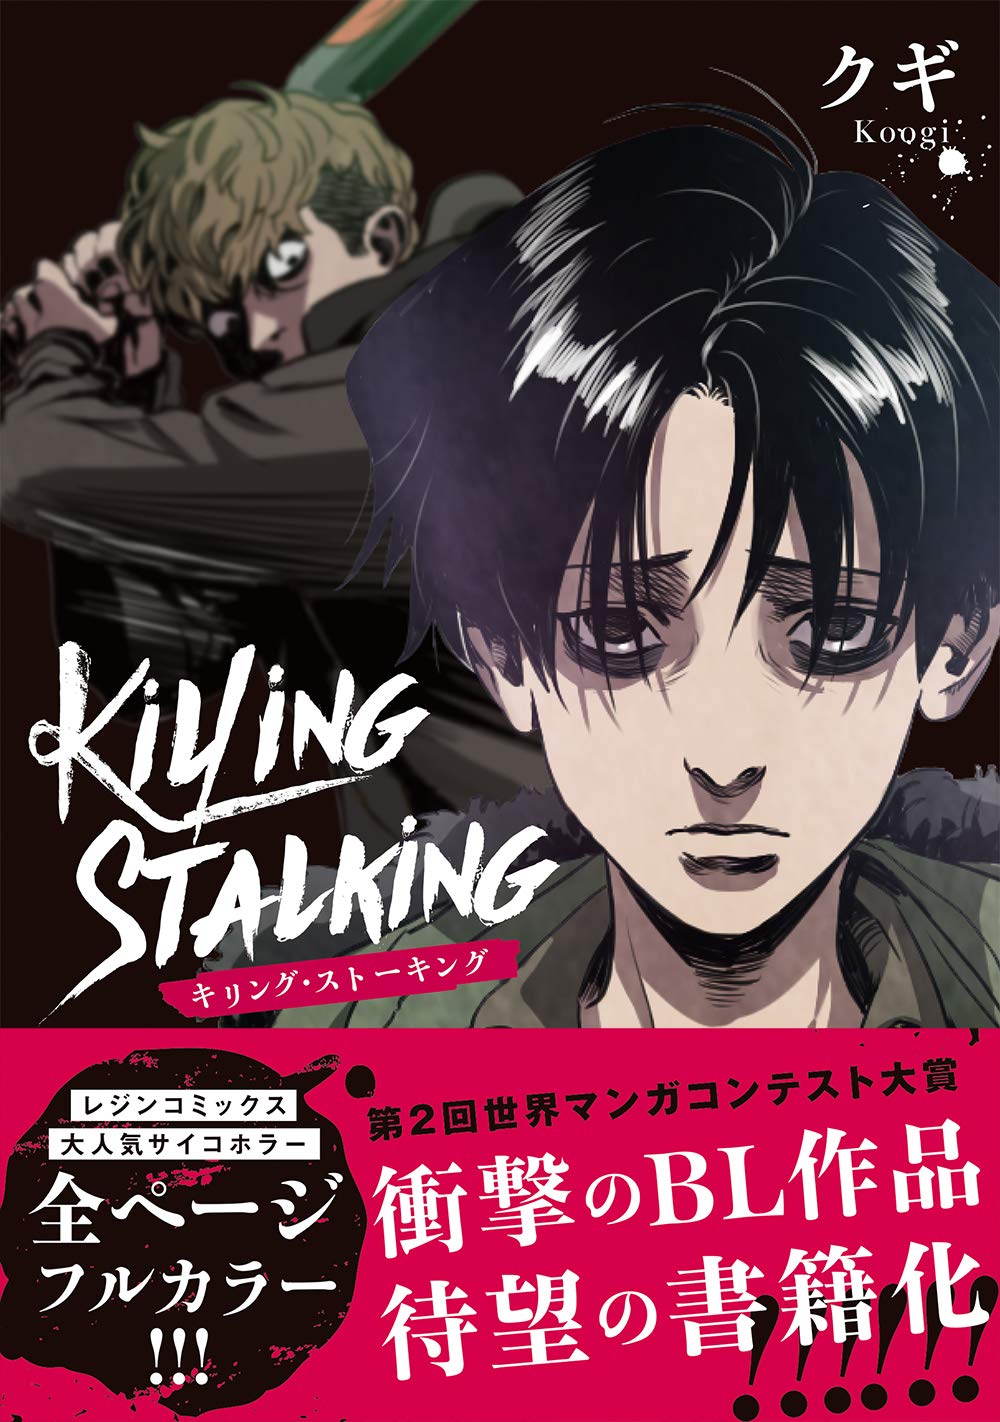 White Paper Anime Killing Stalking Poster Manga Character Painting Picture  Wall Art Prints Living Room Decoration Home Decor – the best products in  the Joom Geek online store